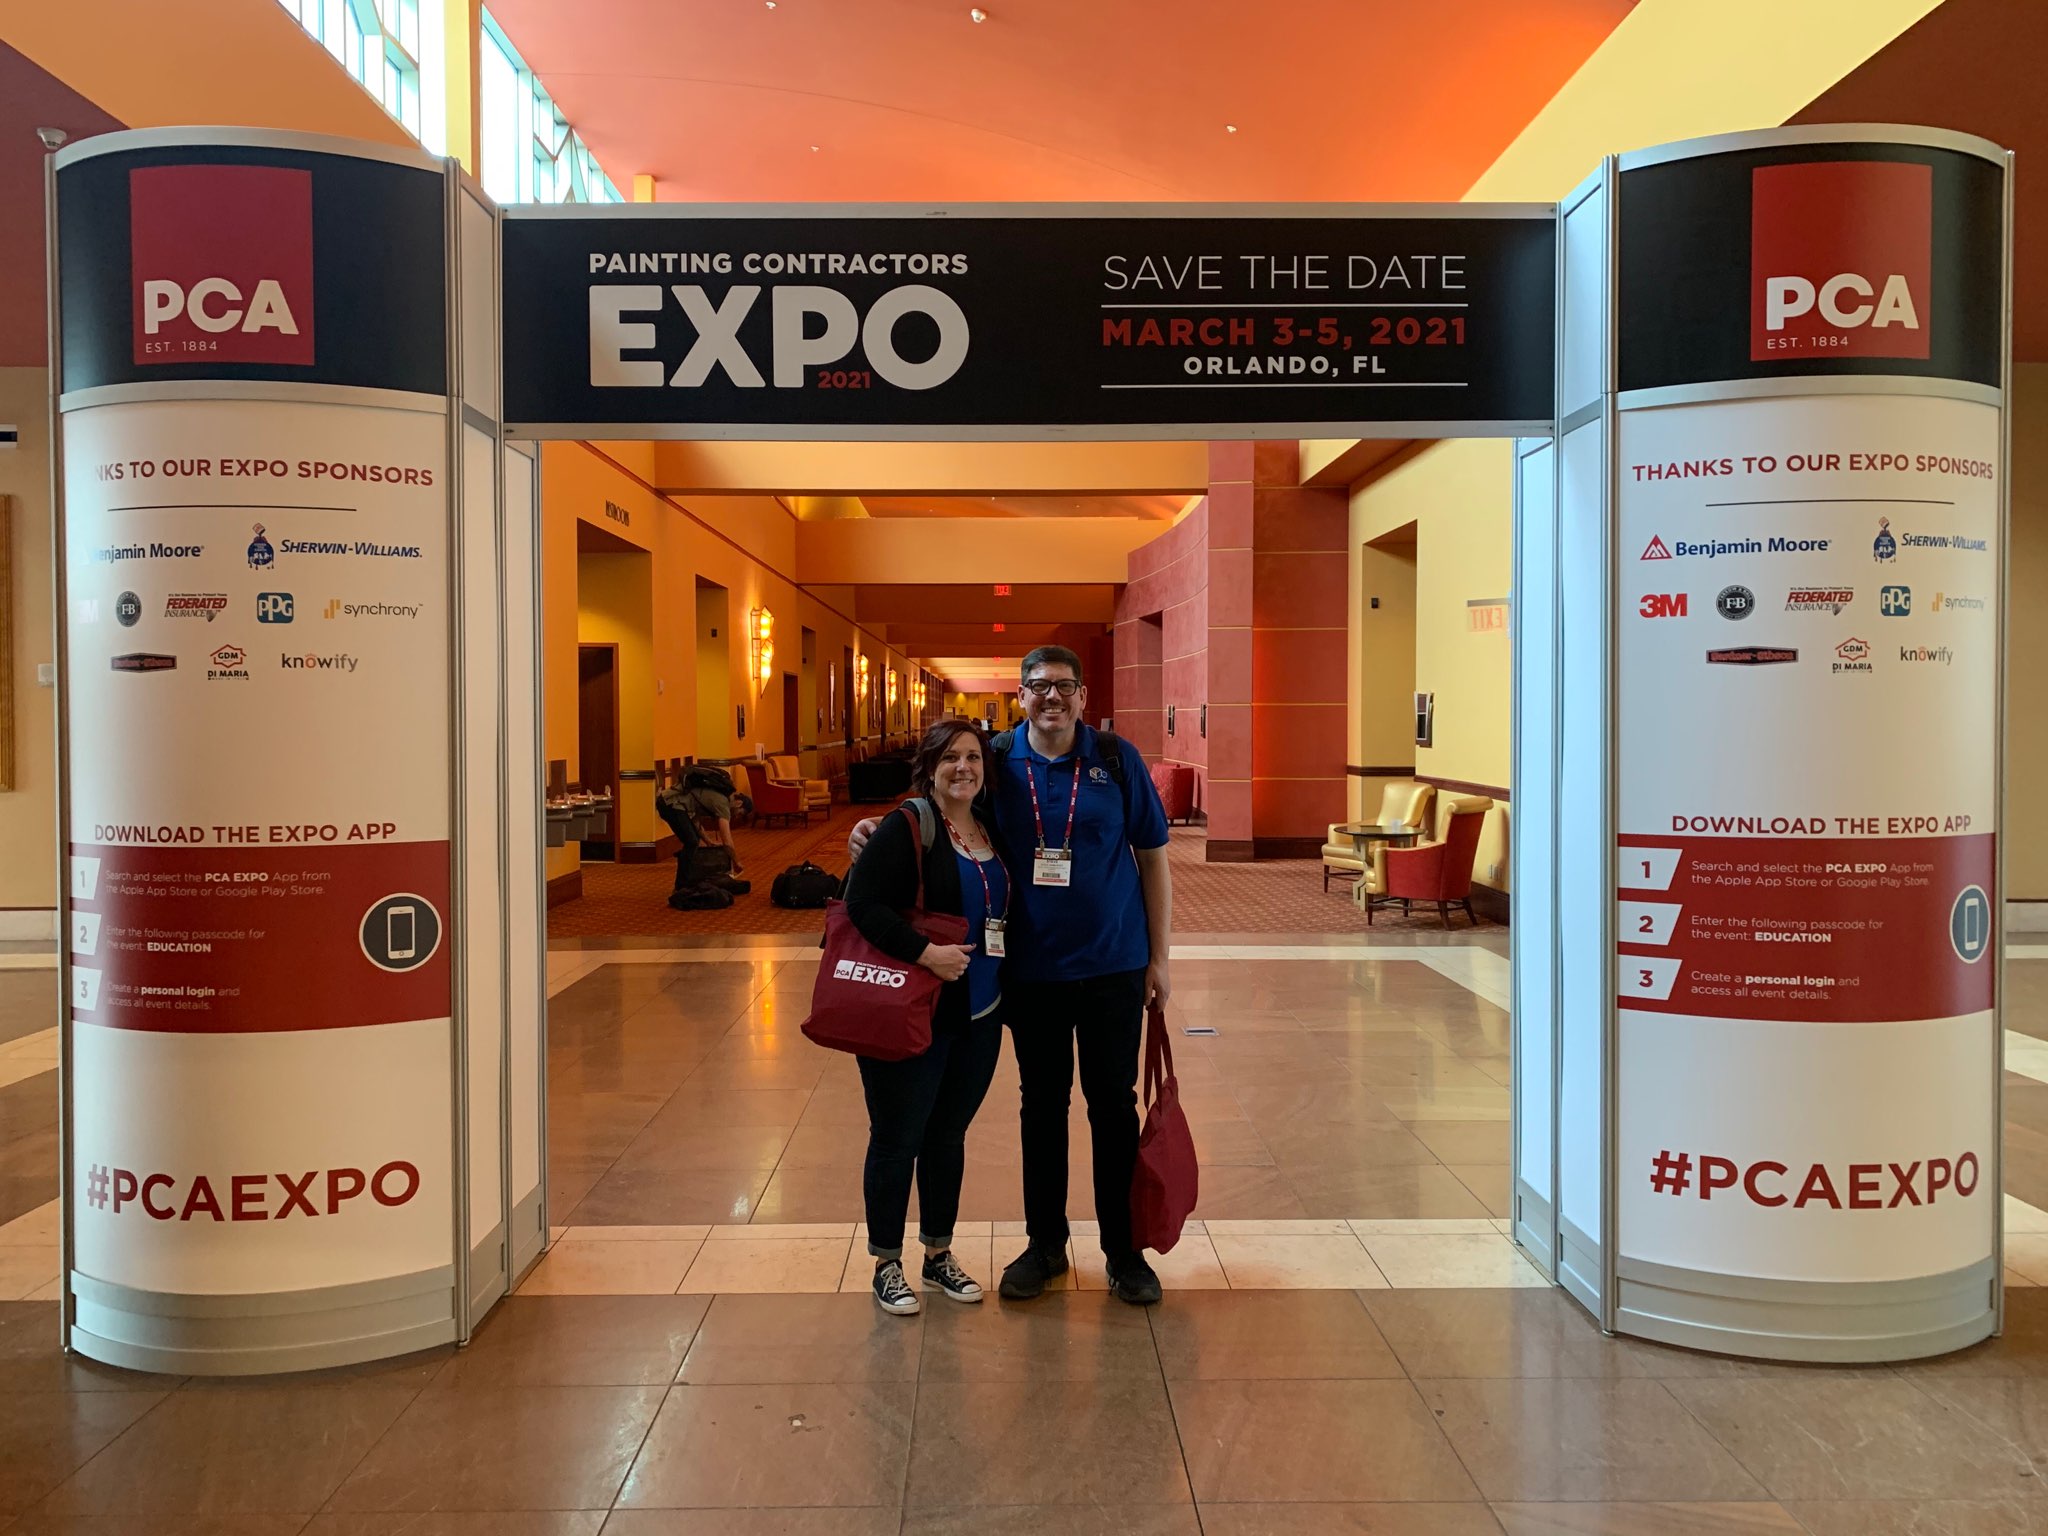 NAPCO Attends Painting Contractors Association (PCA) Expo